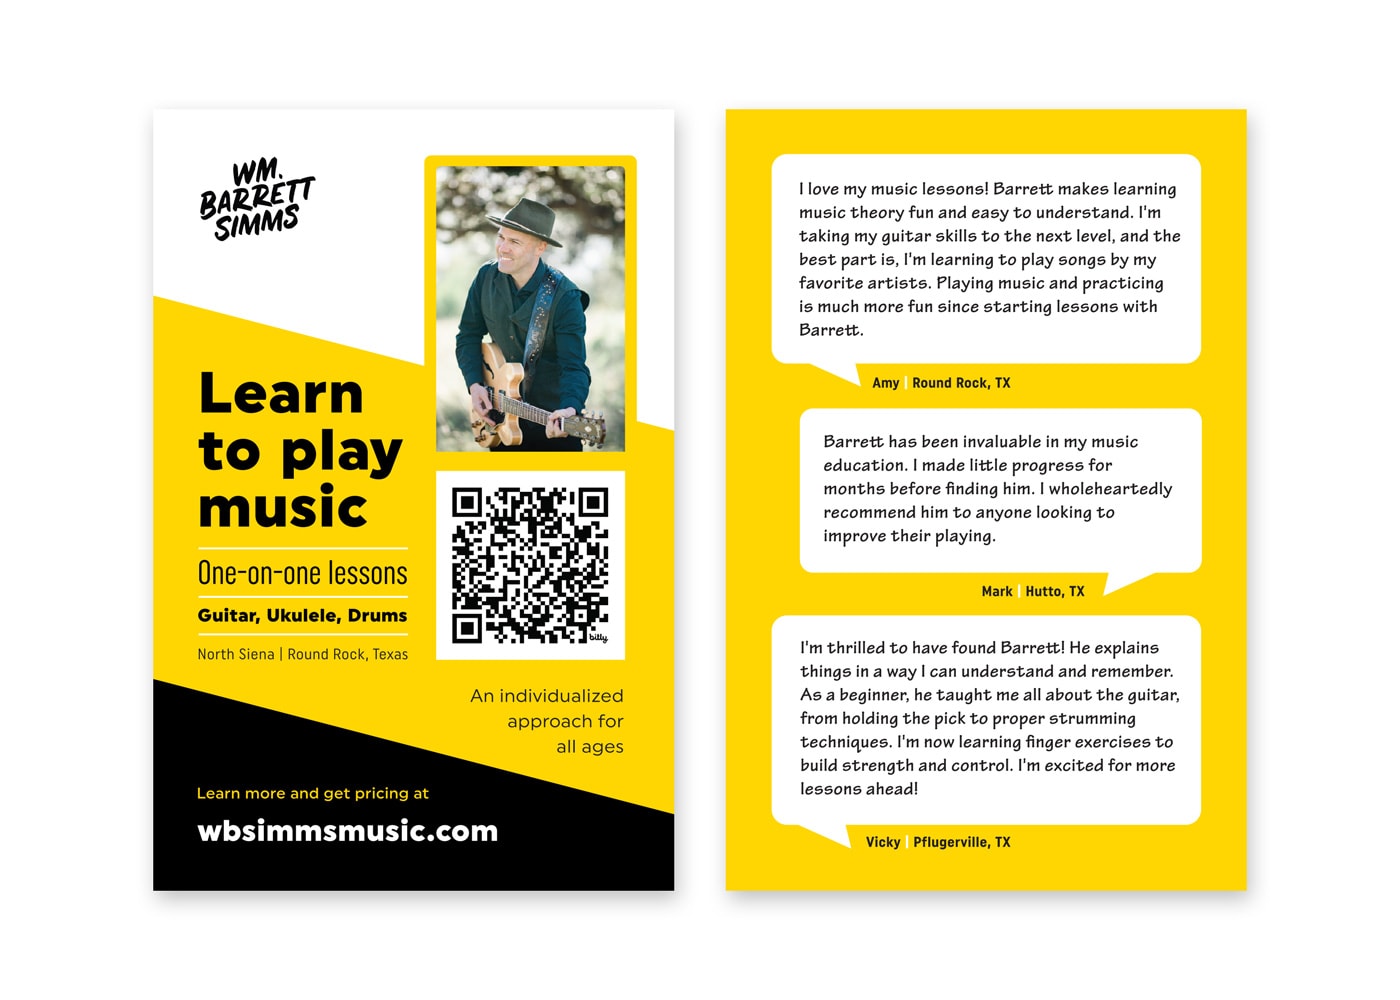 Postcard mockup: Learn to play music with Wm. Barrett Simms. One-on-one lessons, guitar, ukulele, drums